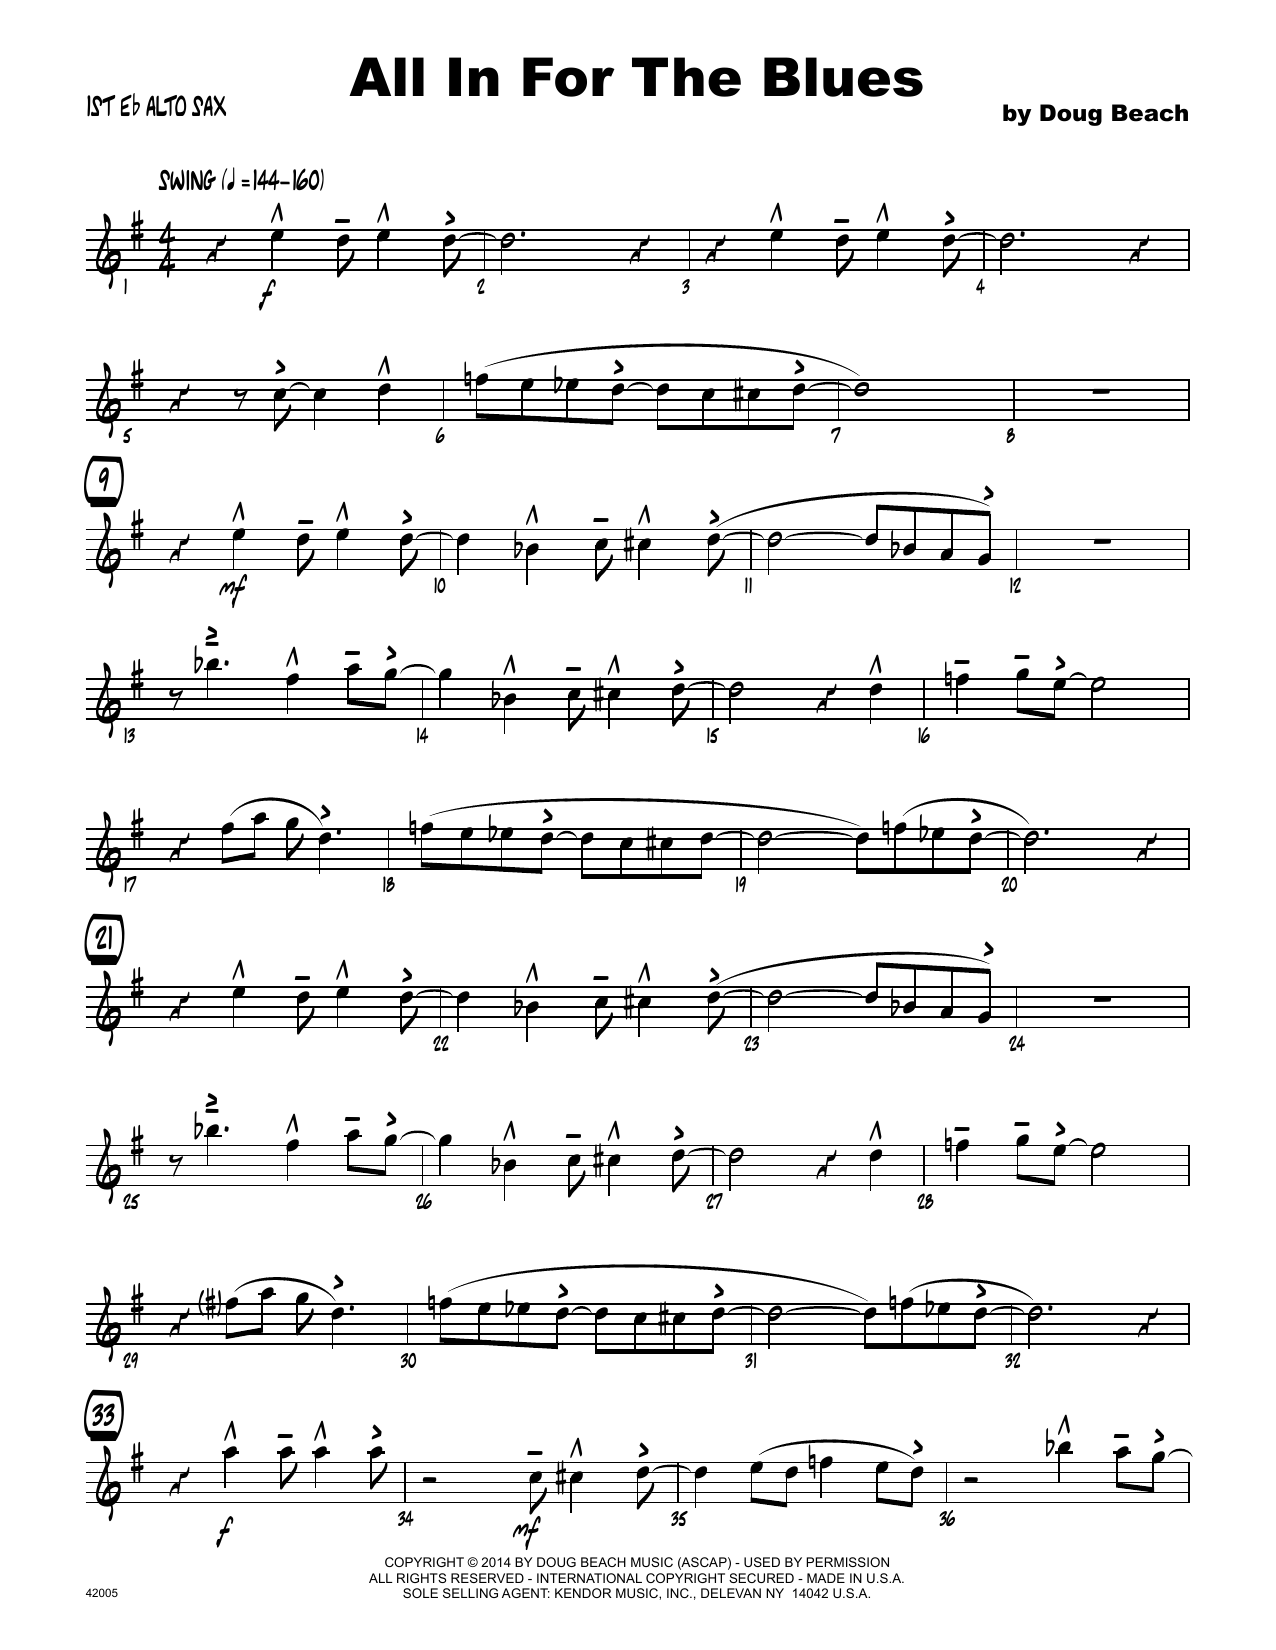 Download Doug Beach All In For The Blues - 1st Eb Alto Saxo Sheet Music